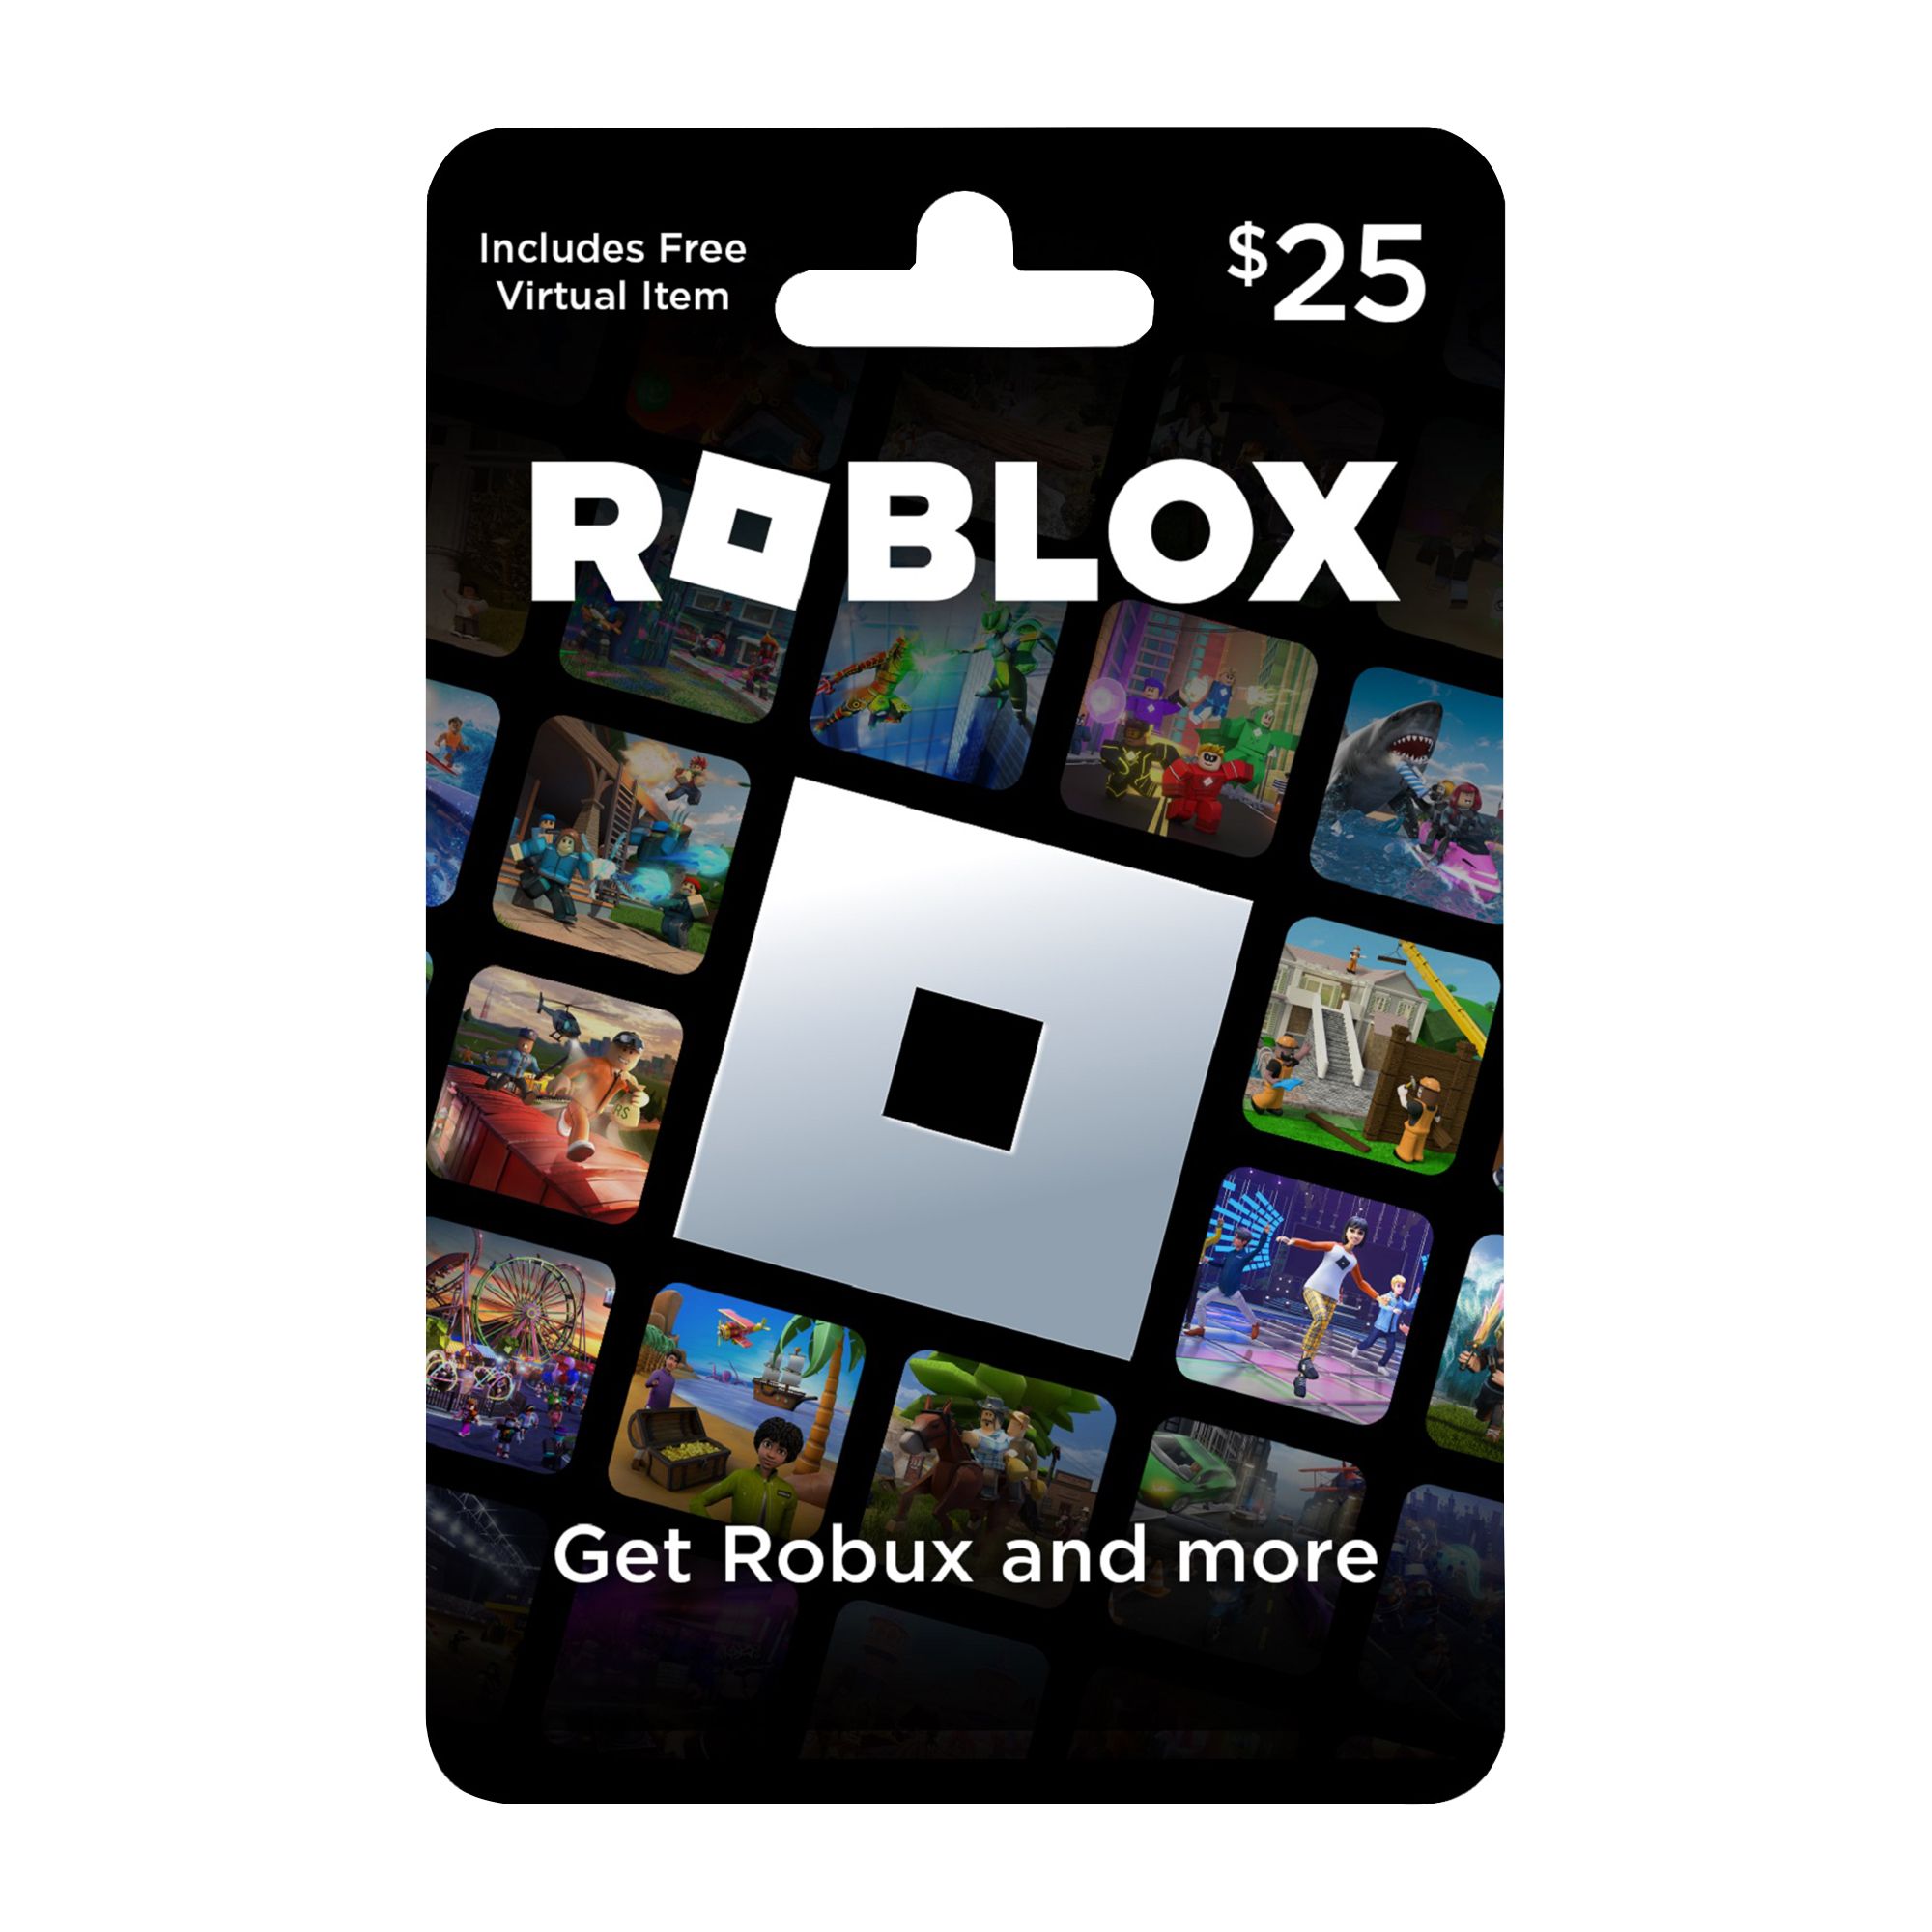 My Roblox is Bugged for over 3 Months Now - Platform Usage Support